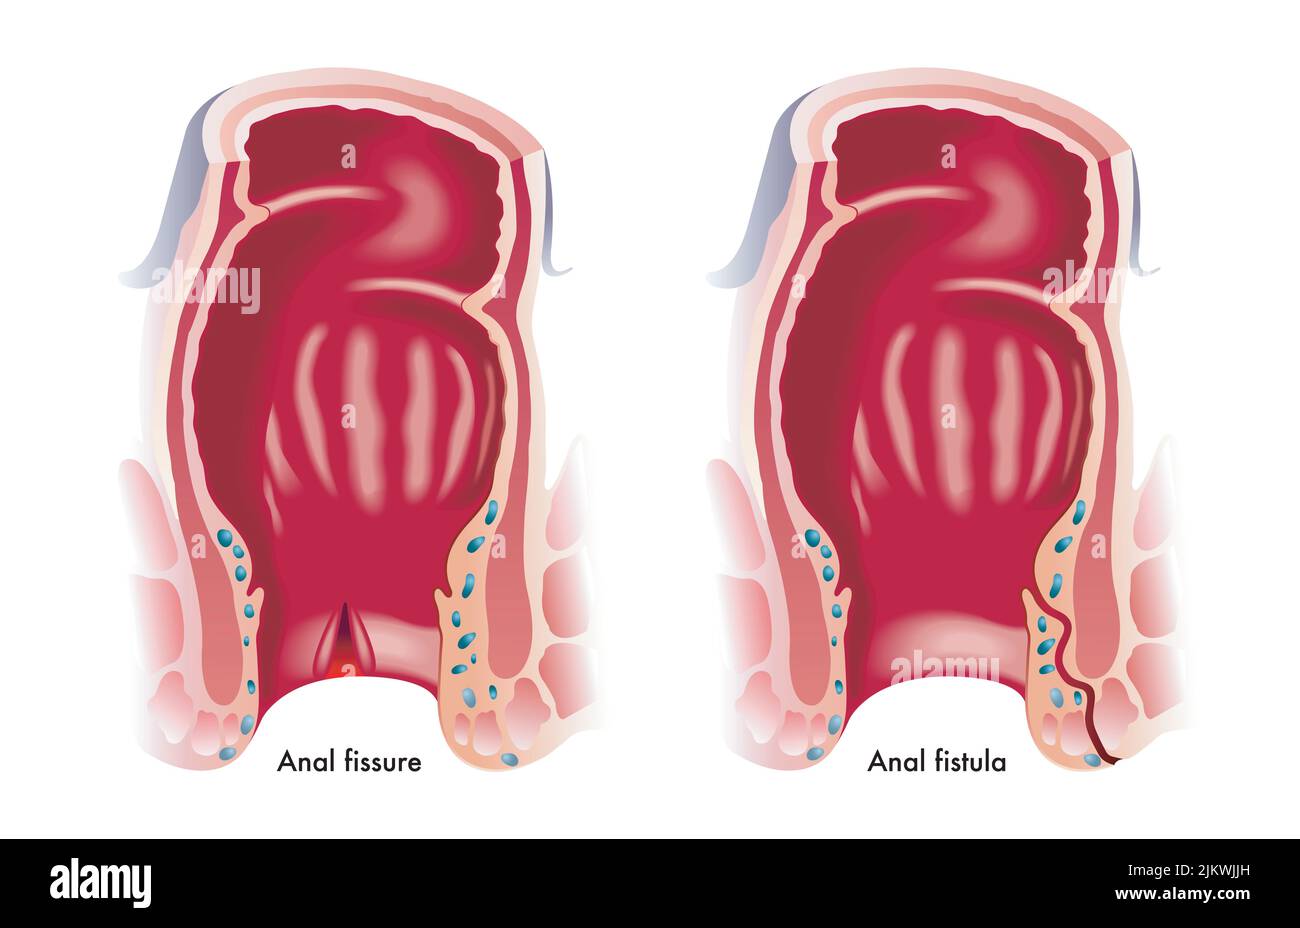 Medical illustration shows two common anal disorders, an anal fissure and an anal fistula. Stock Photo